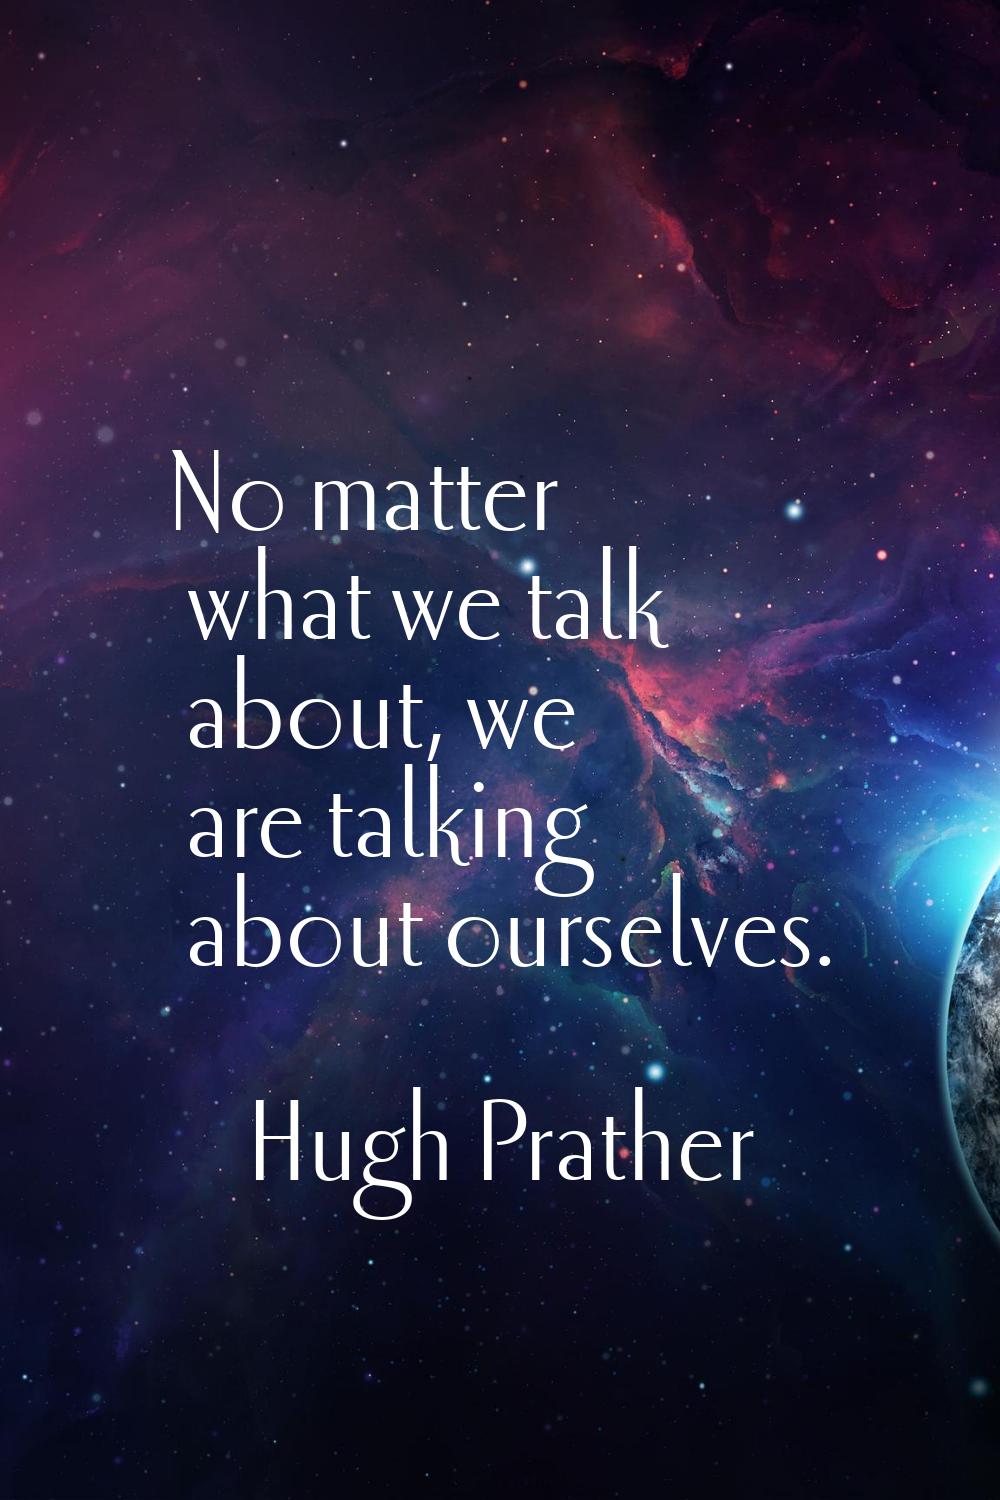 No matter what we talk about, we are talking about ourselves.